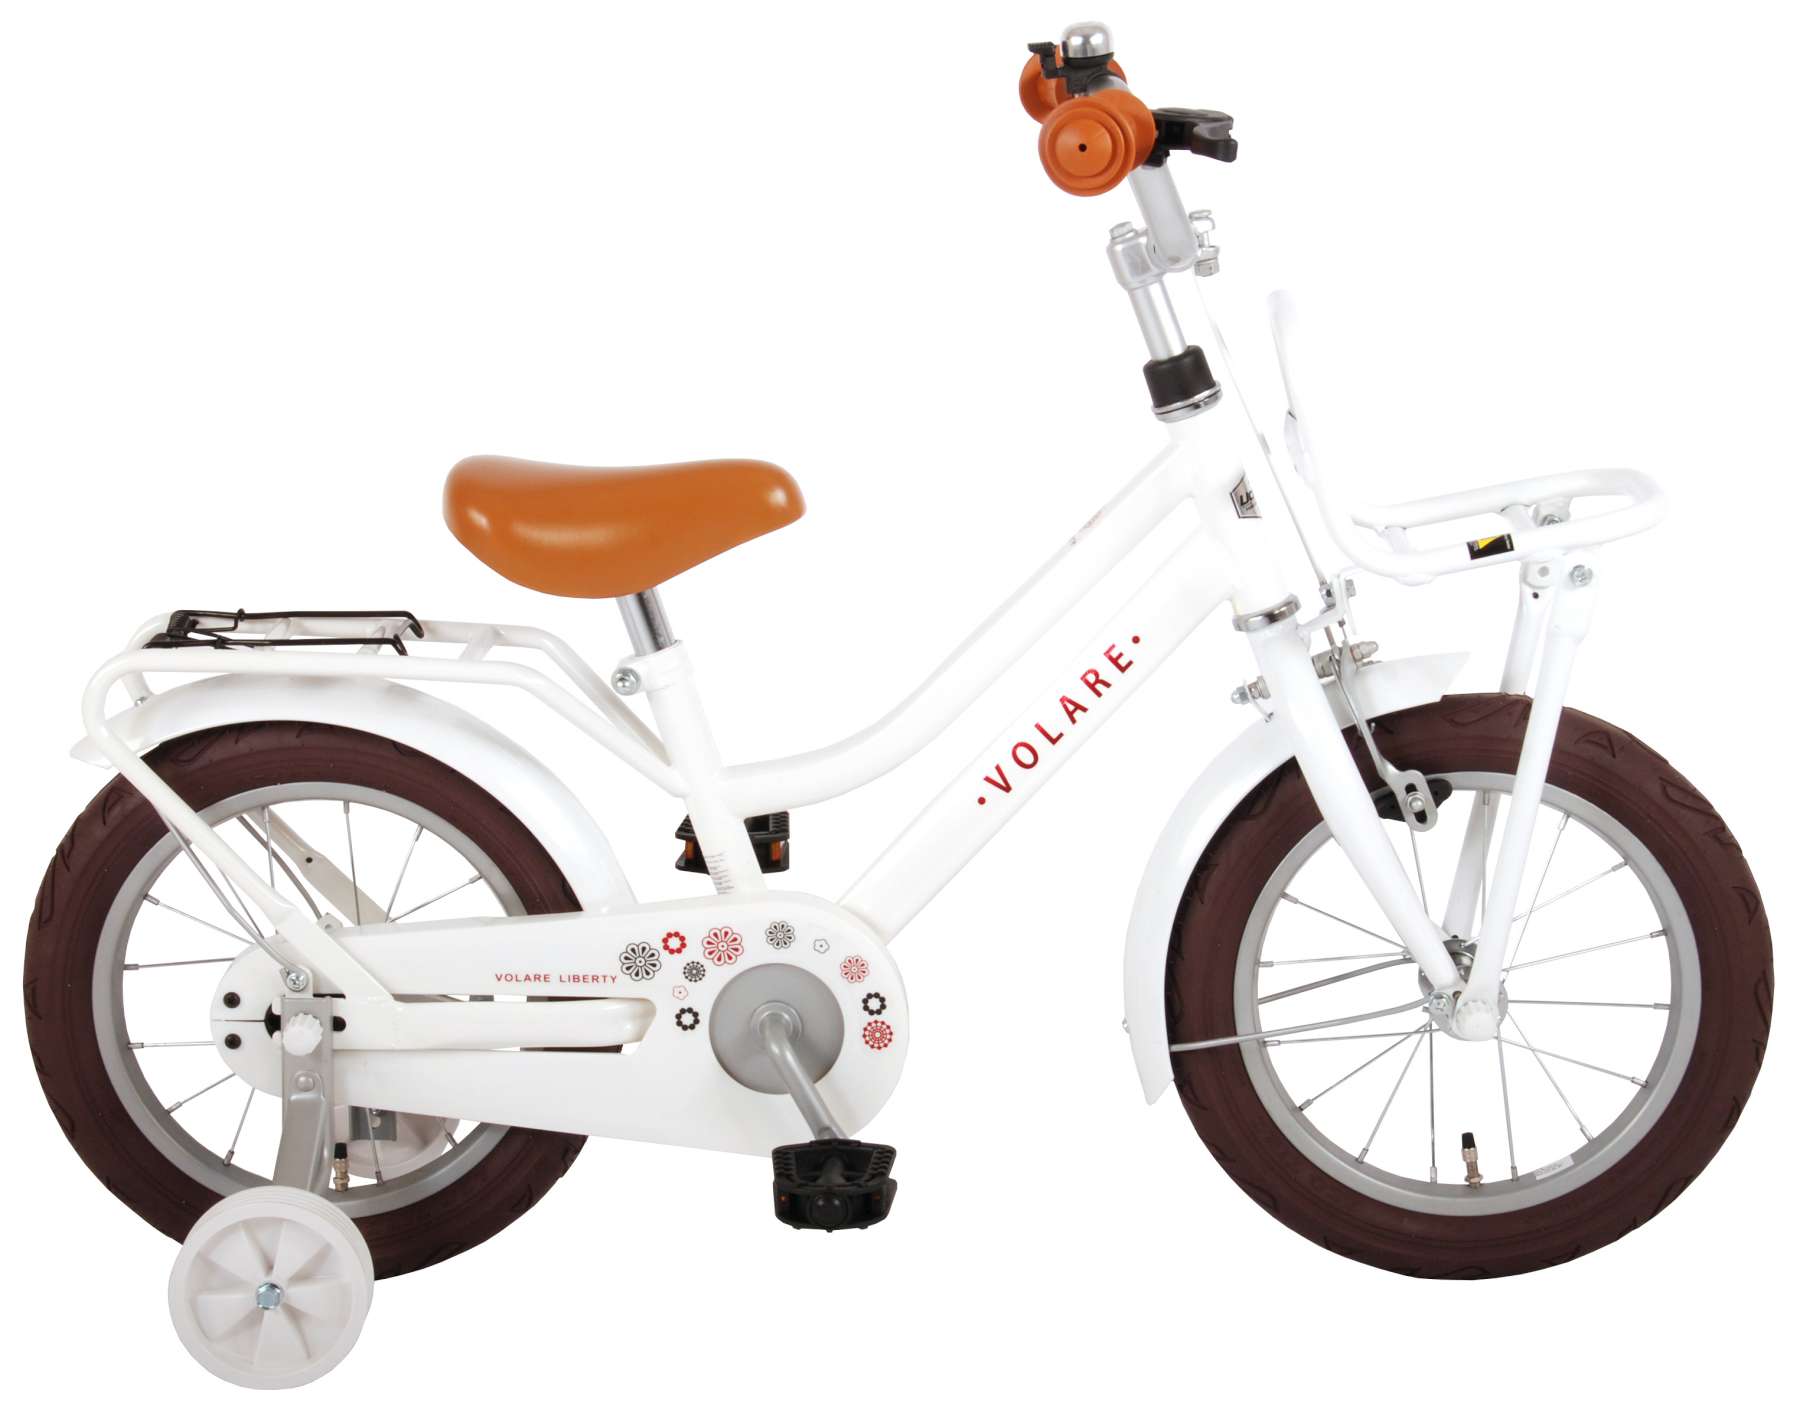 Girls' Bikes :: Girls' 14 inch :: Volare Liberty Children's Bicycle - Girls - 14 - White - 95% assembled - Kids' bikes - Lowest price guarantee - Free delivery